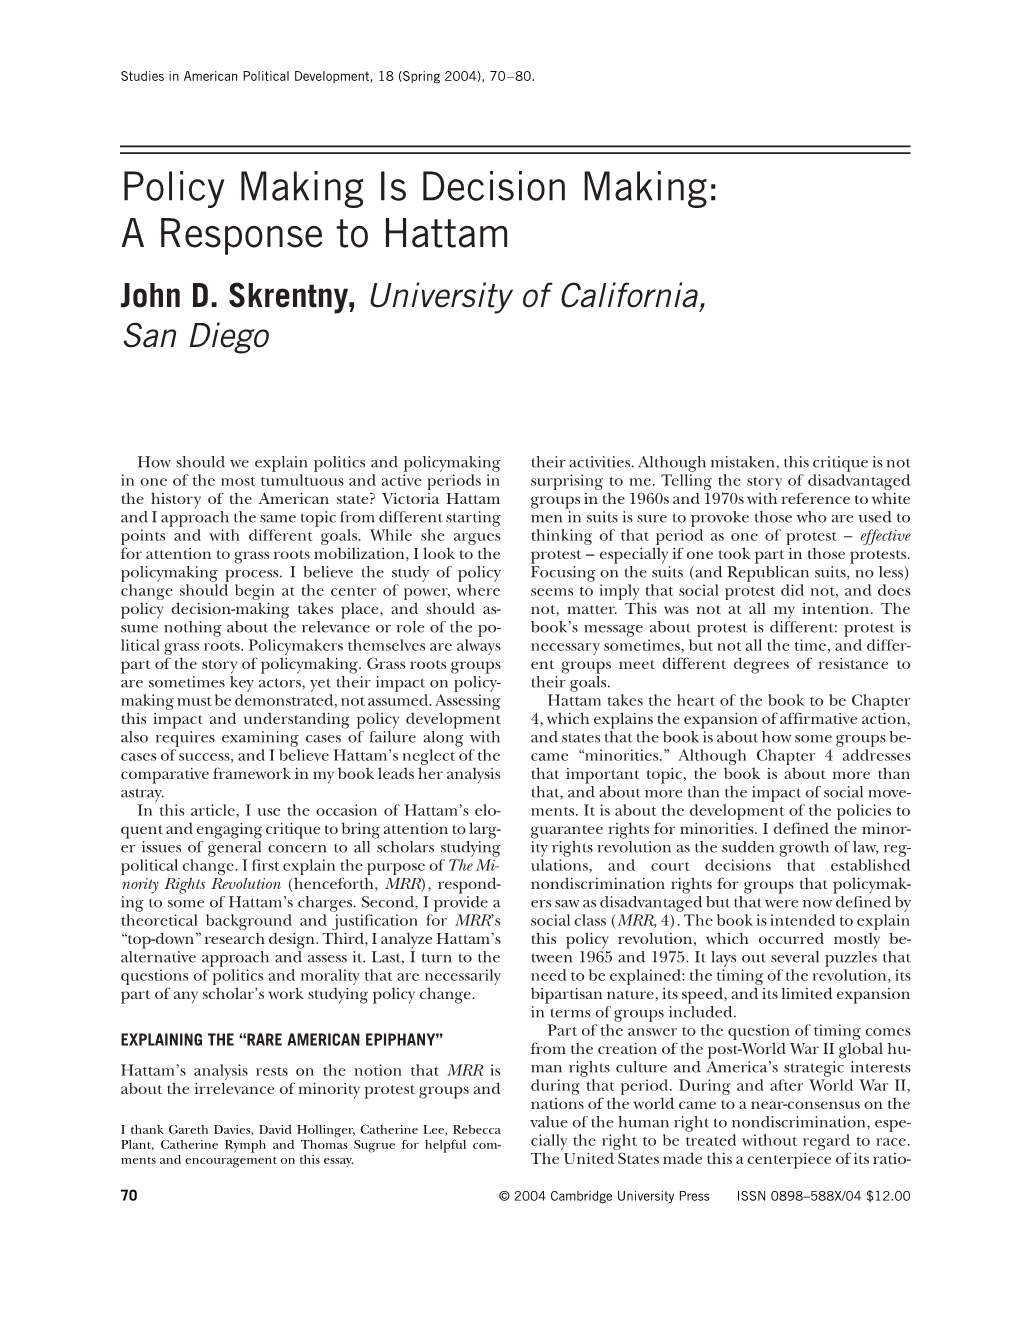 Policy Making Is Decision Making: a Response to Hattam John D